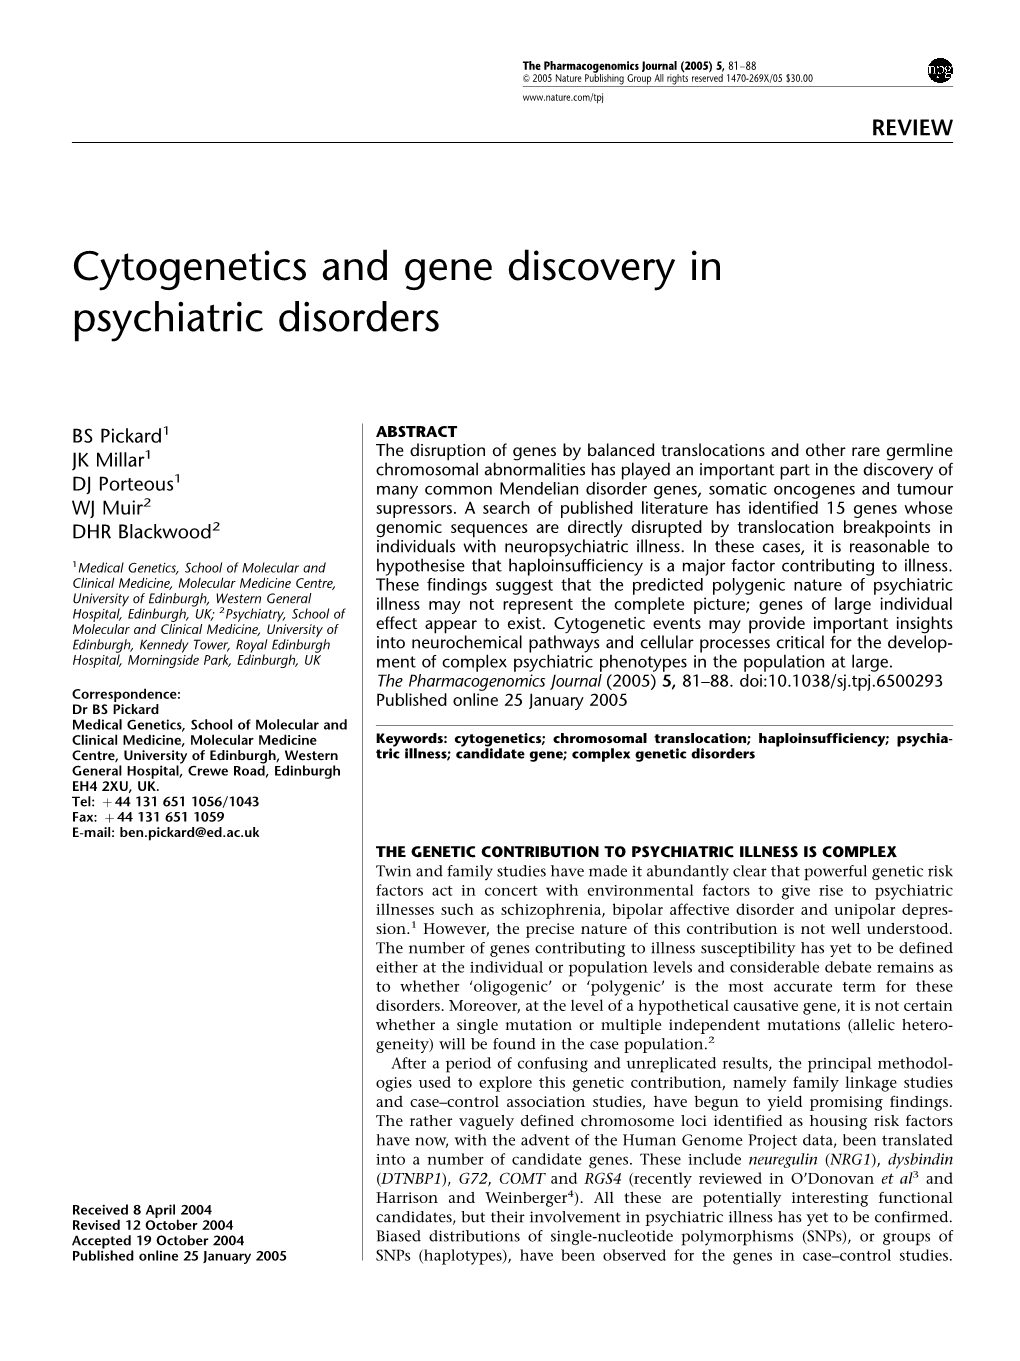 Cytogenetics and Gene Discovery in Psychiatric Disorders